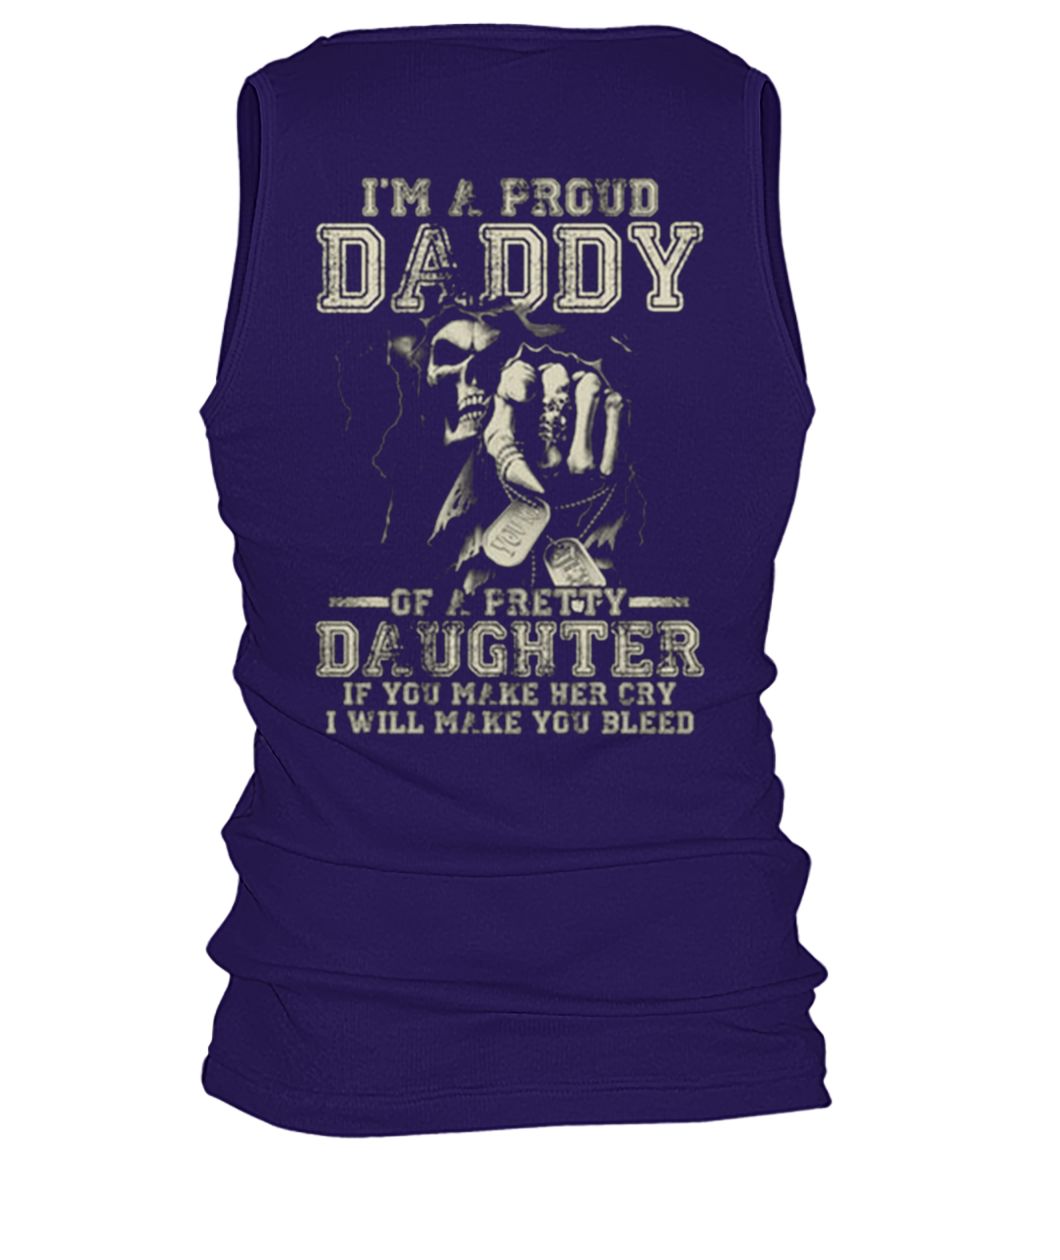 Skull I'm a proud daddy of a pretty daughter men's tank top